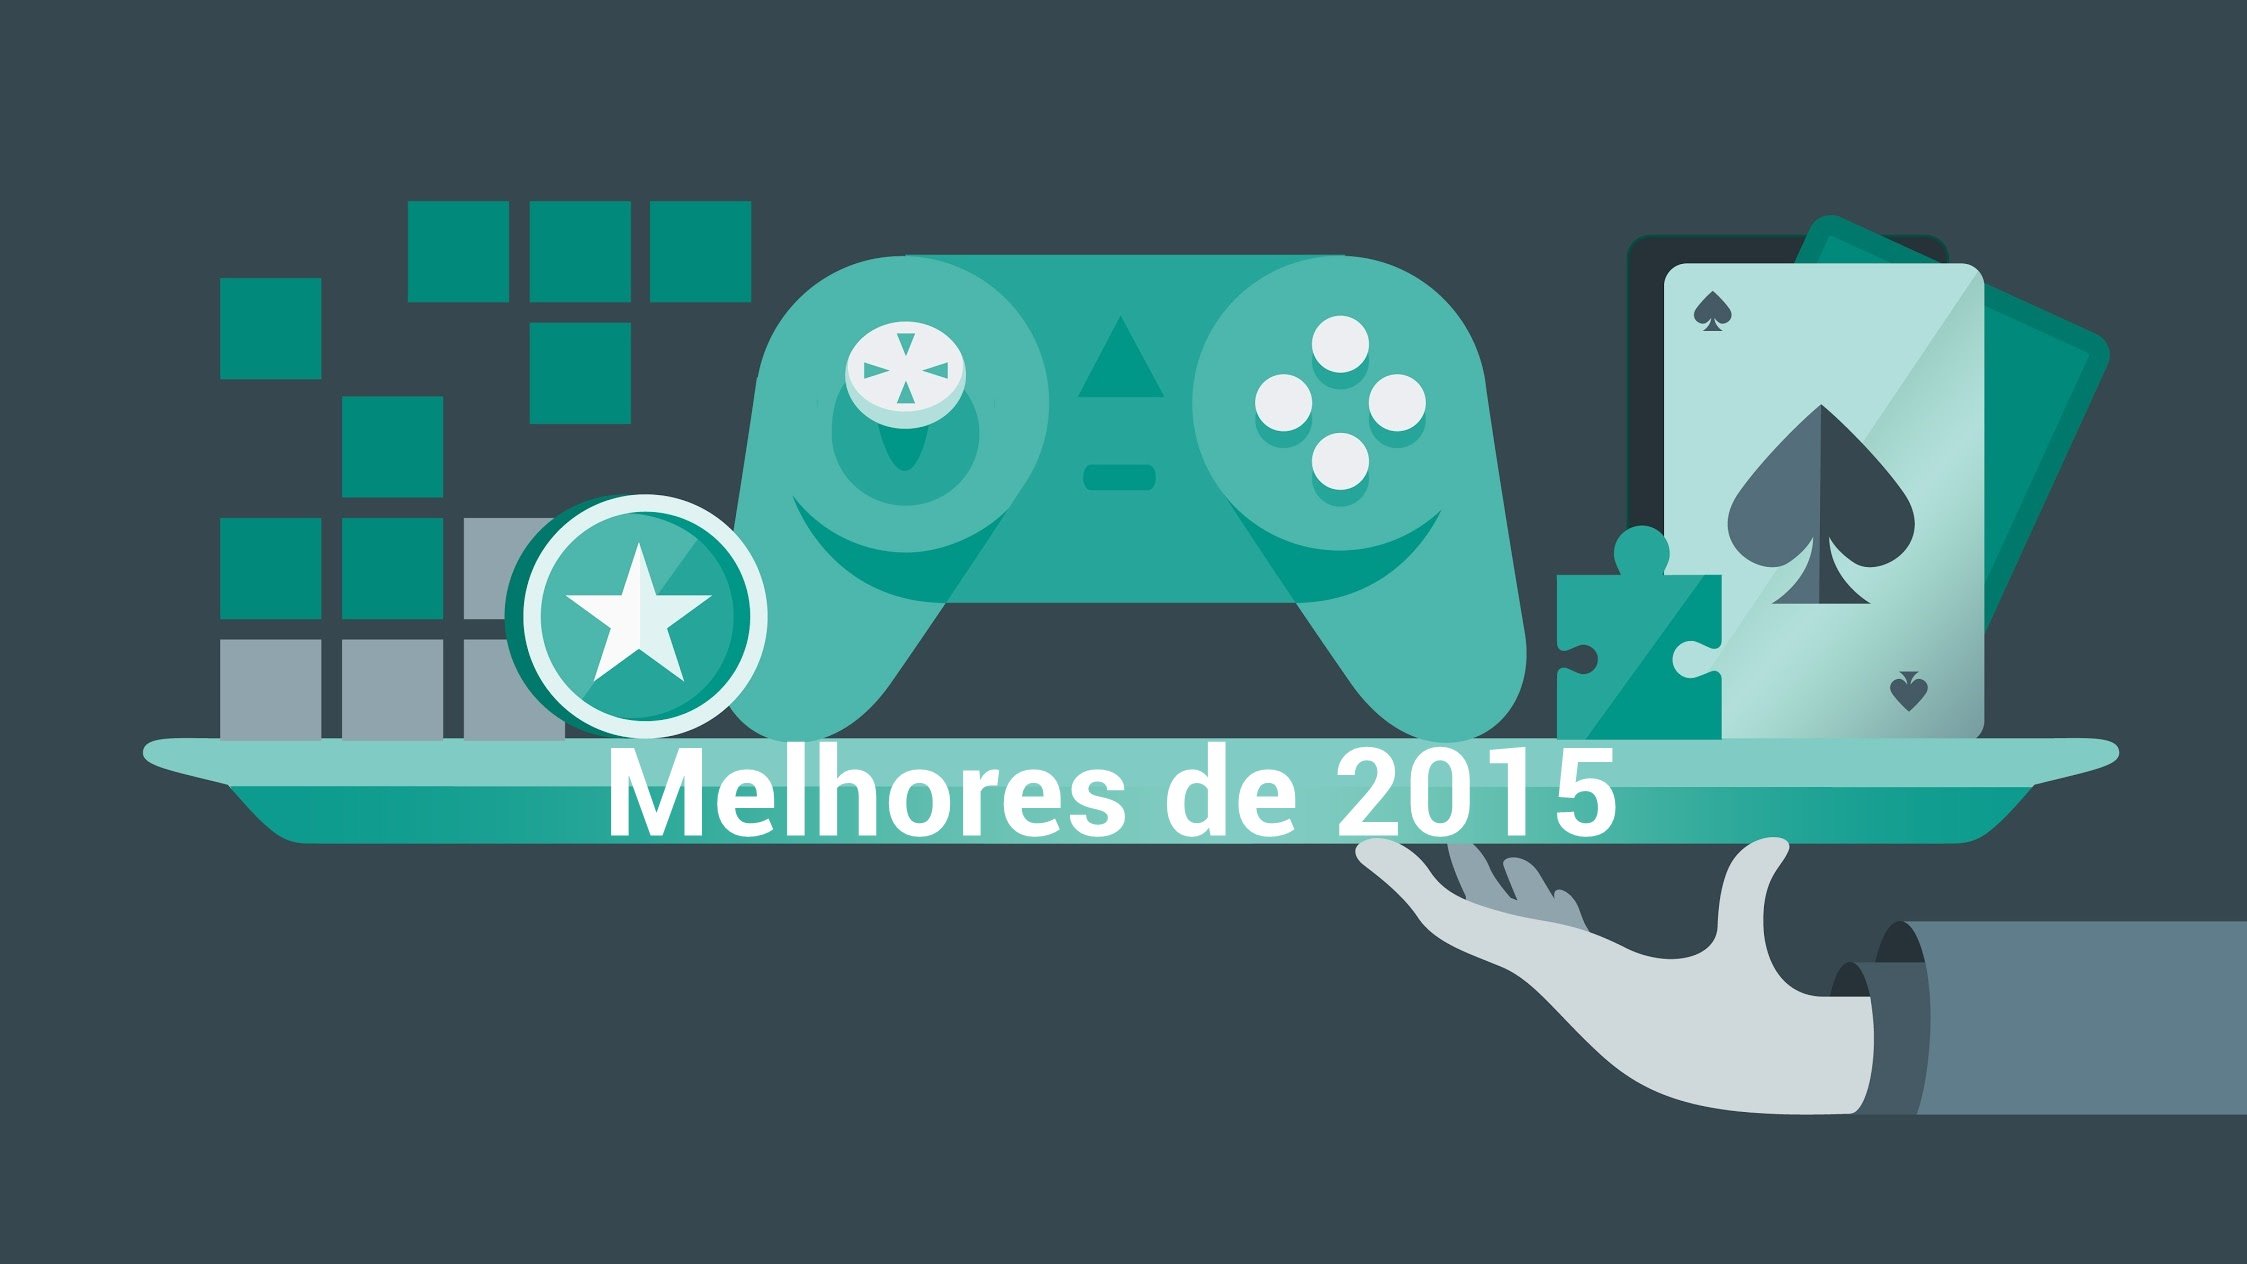 Check out the 25 best games of 2015 for Android according to Google